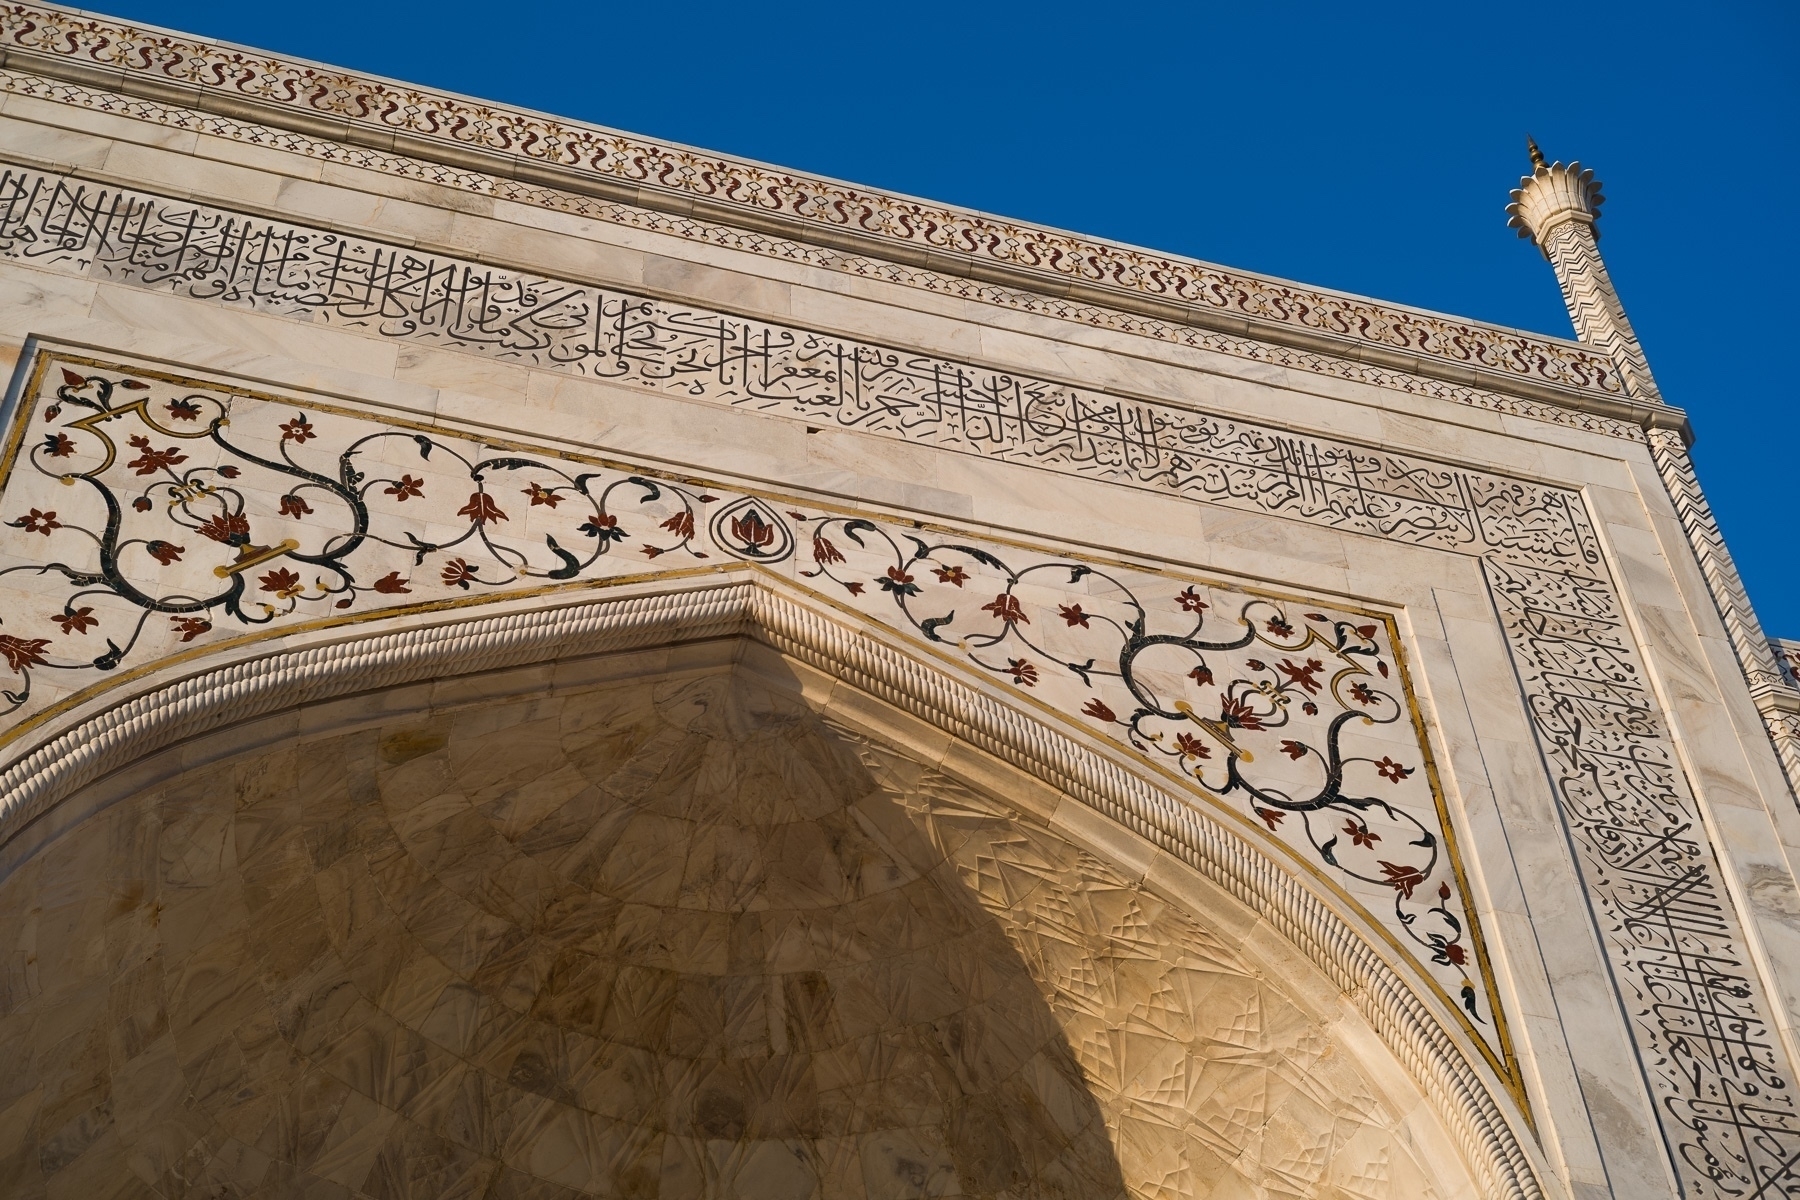 Main arch on the front of the Taj Mahal showing the stone inlaid patterns of flowers and inscriptions embedded in the marble.